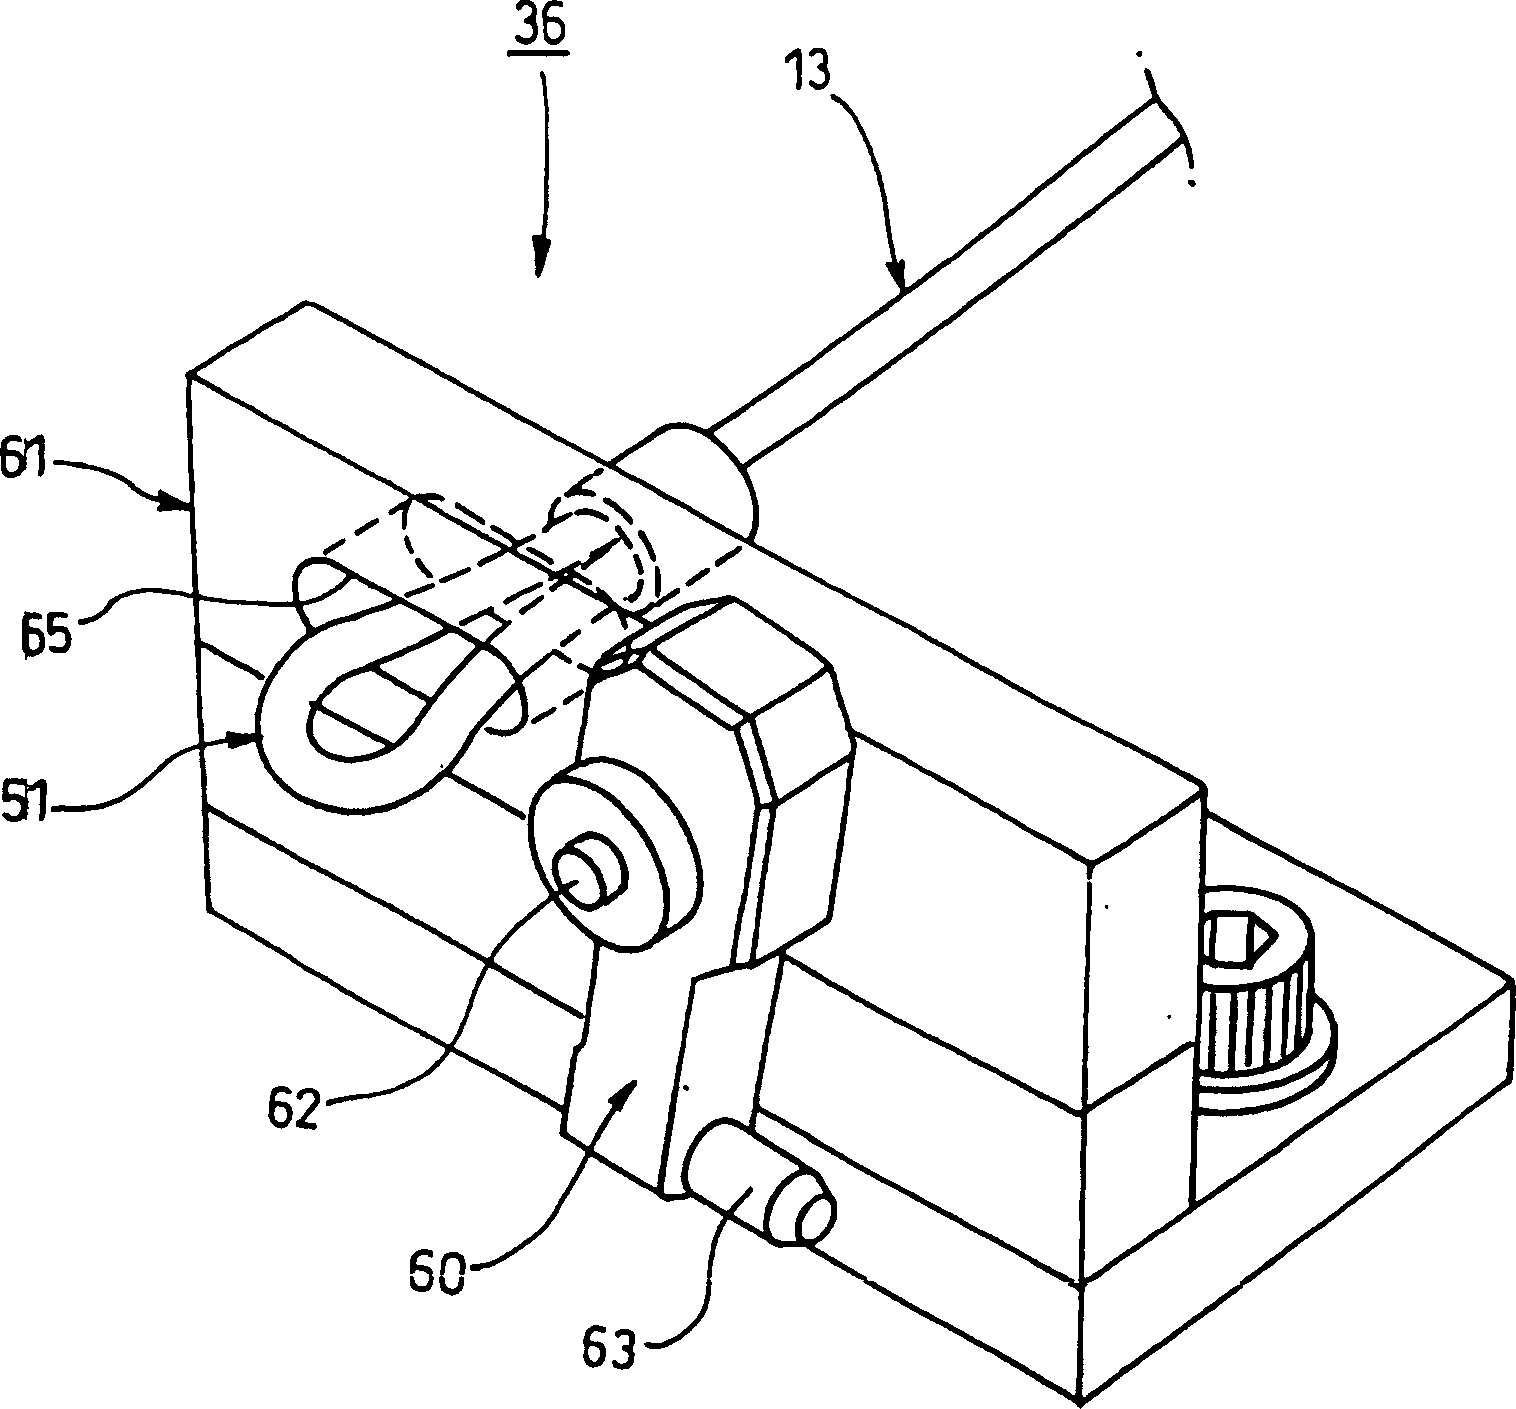 Method of inserting wire in rubber sleeving and rubber sleeving expander